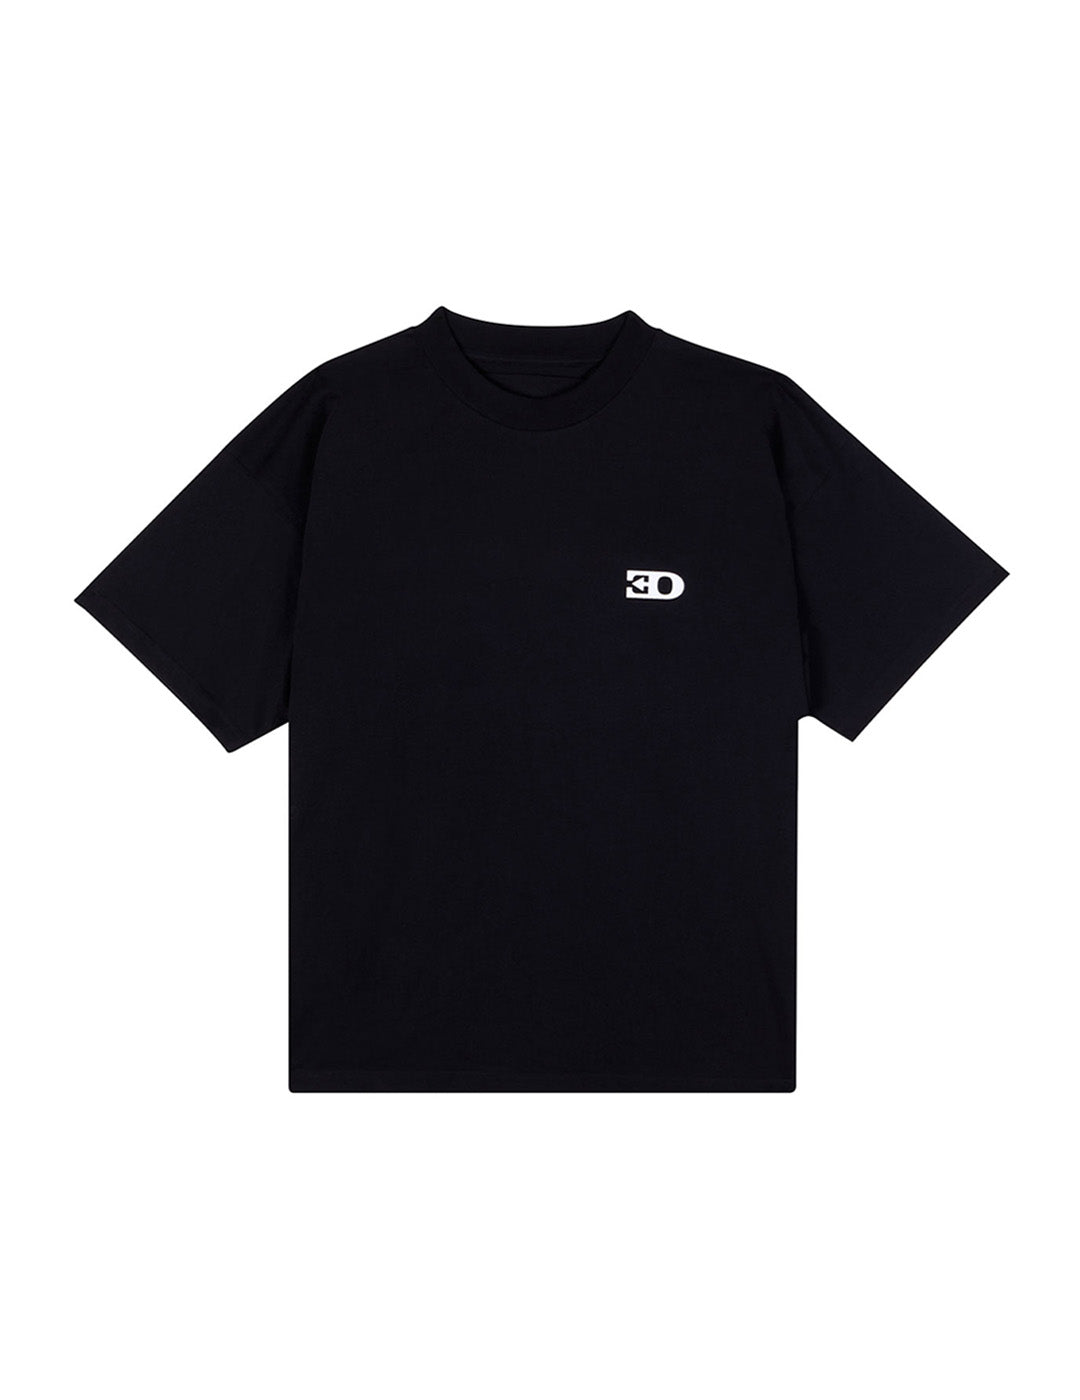 THE LOGO T-SHIRT IN BLACK COTTON